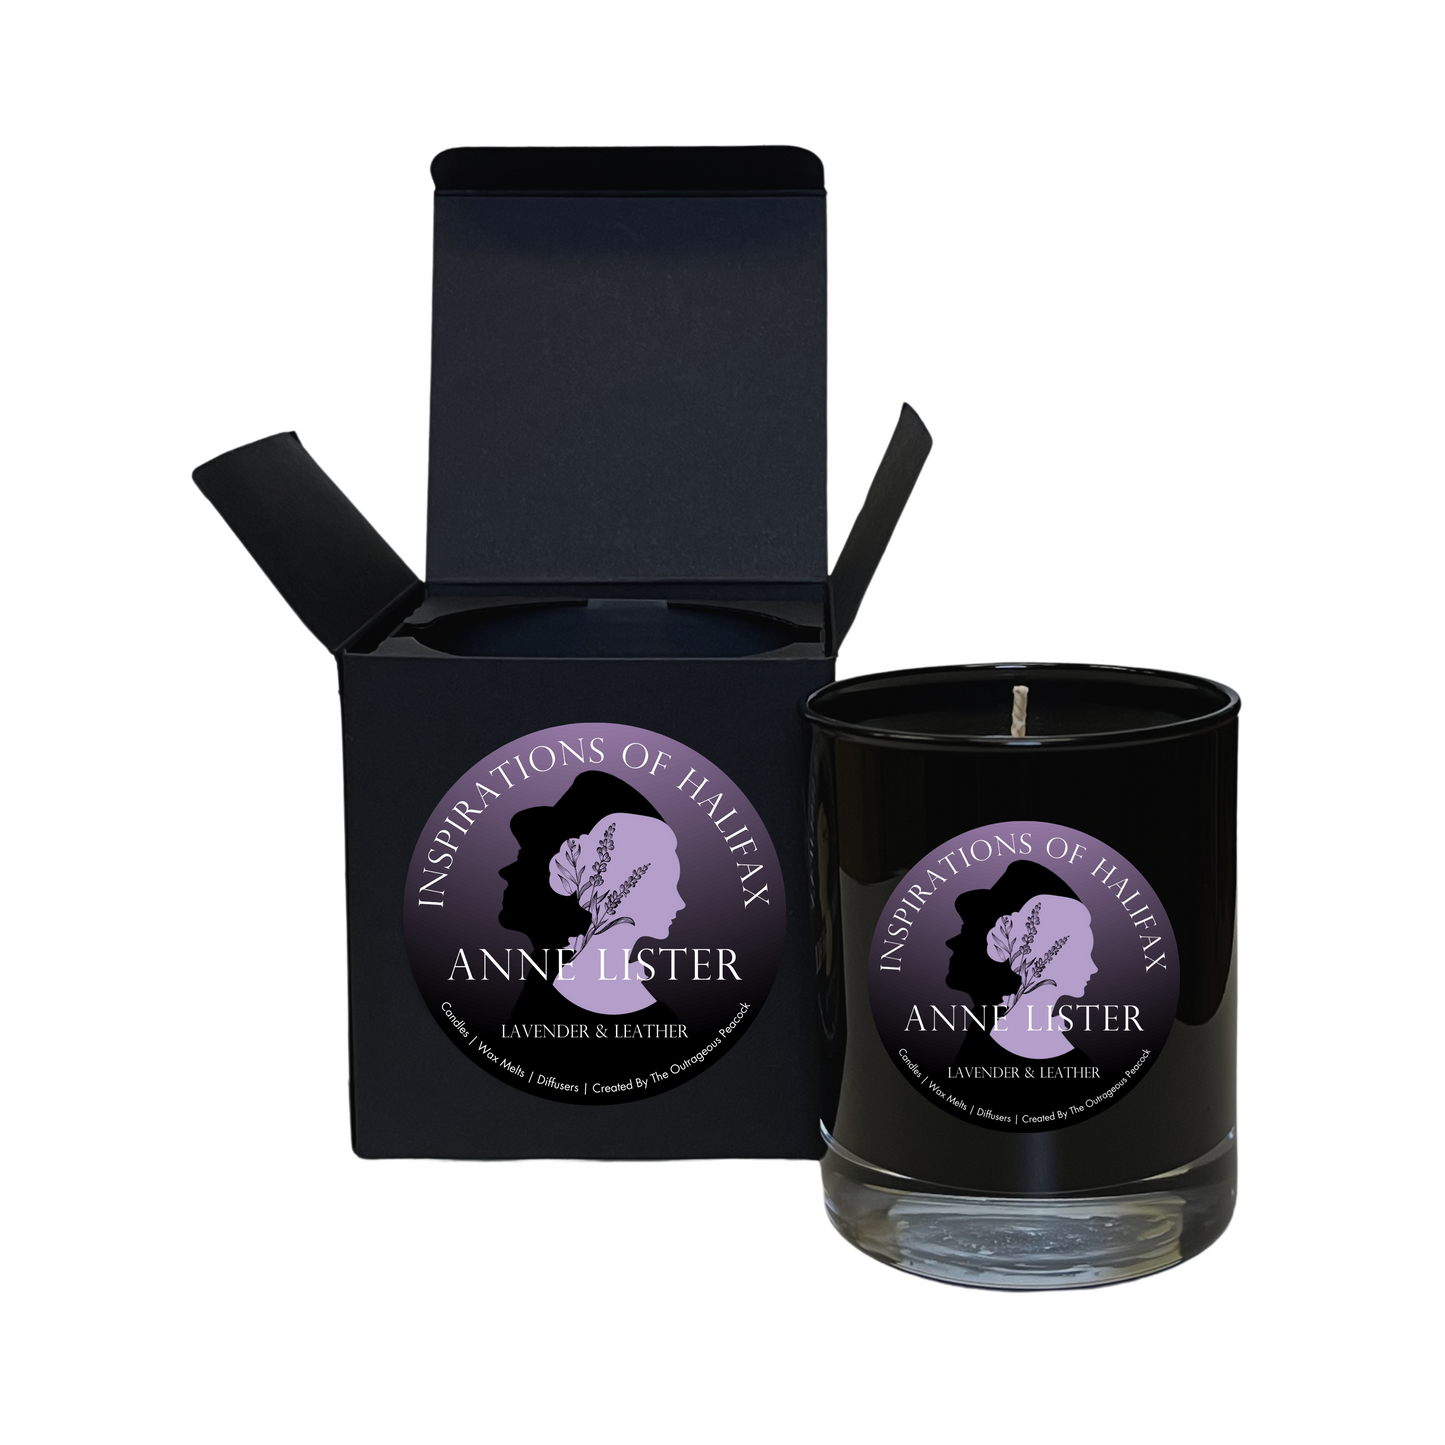 Inspirations of Halifax - Anne Lister Fragrance Lavender & Leather